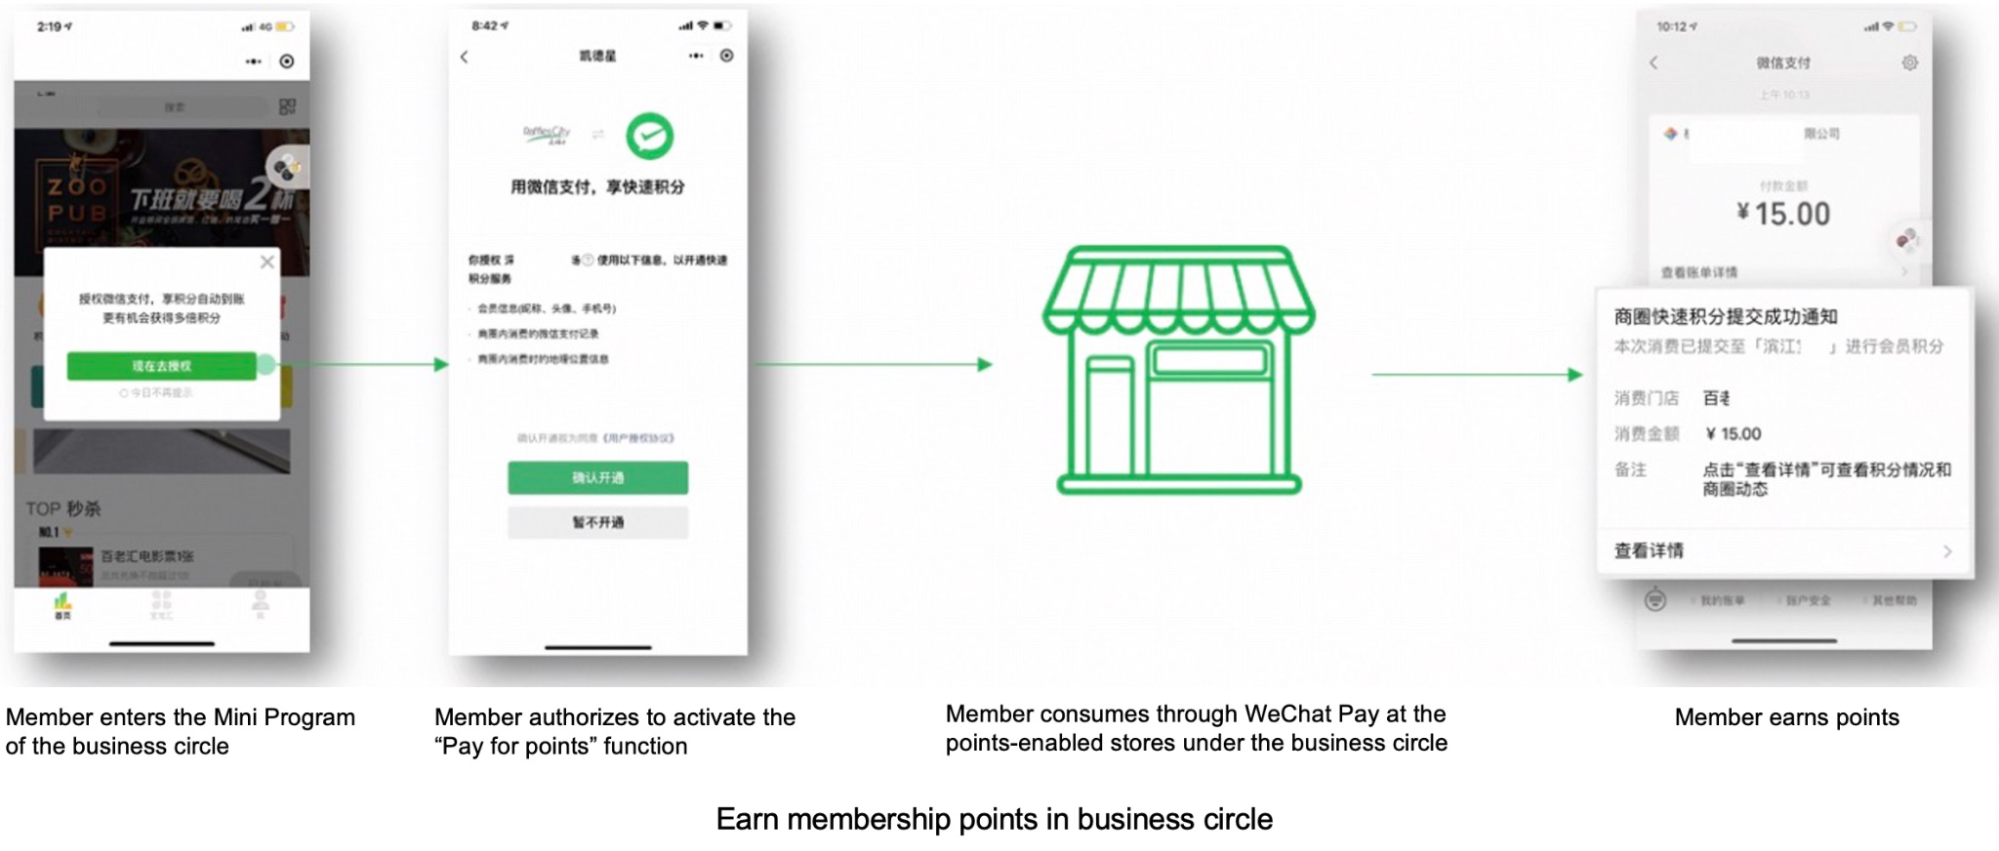 Image of earning membership points notifications